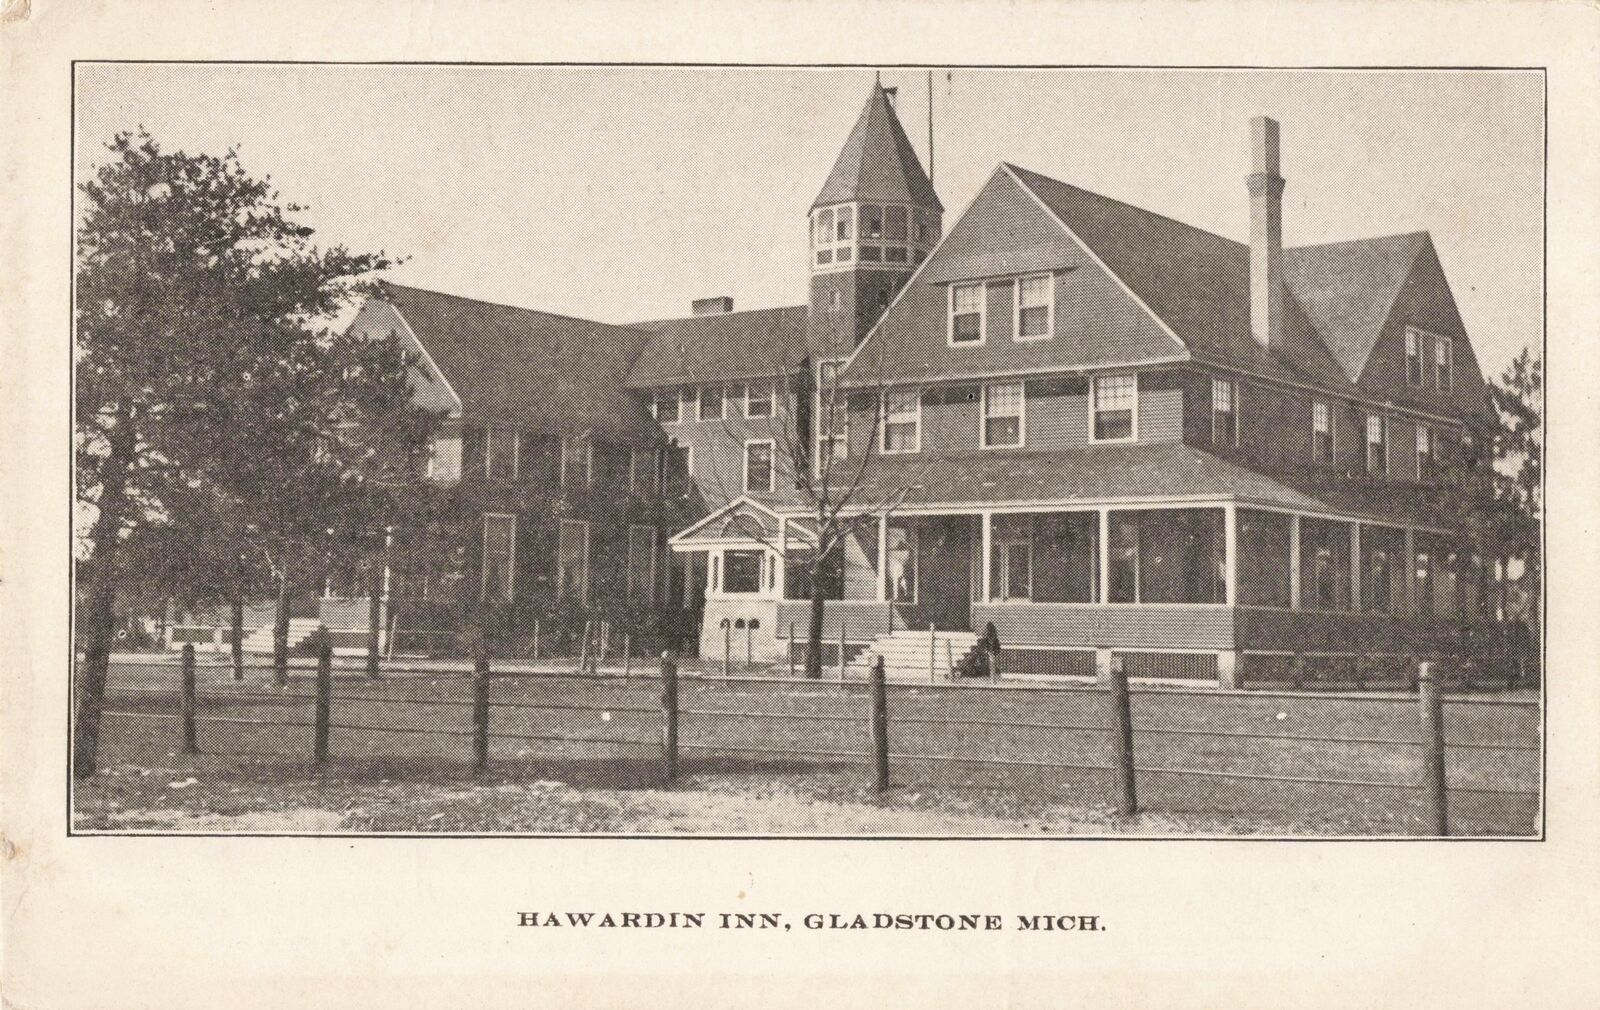 UP Gladstone MI On September 2, 1911 the Opulent Hawarden Inn was foreclosed on